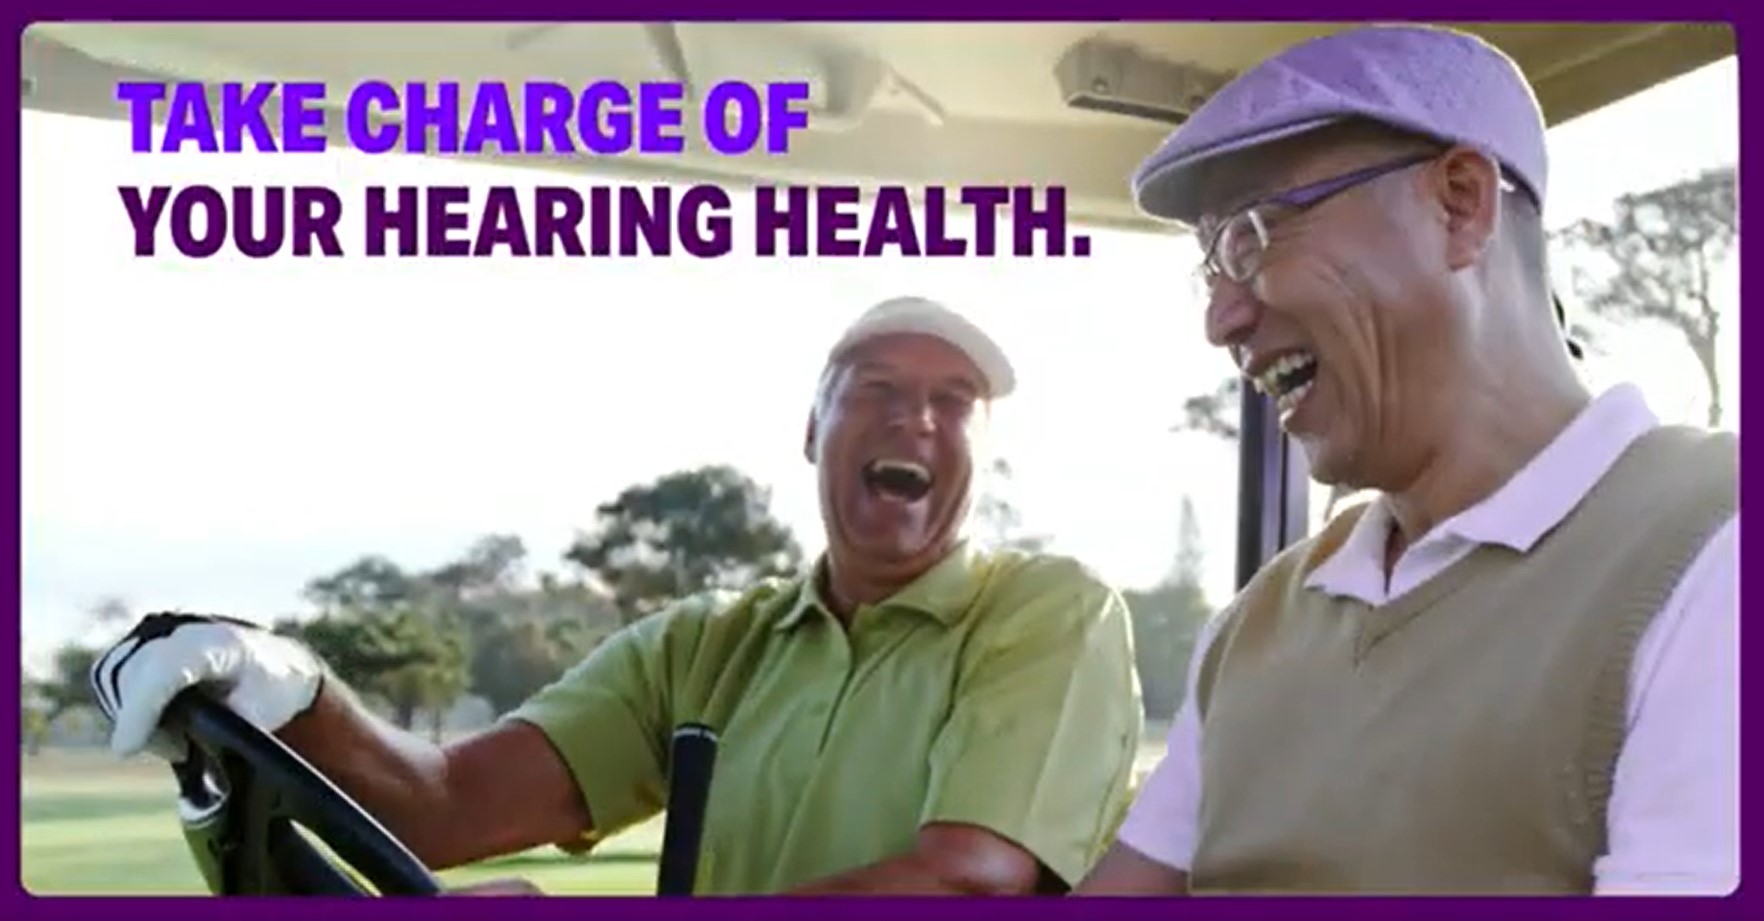 Hearing aids can help you to take charge of your life